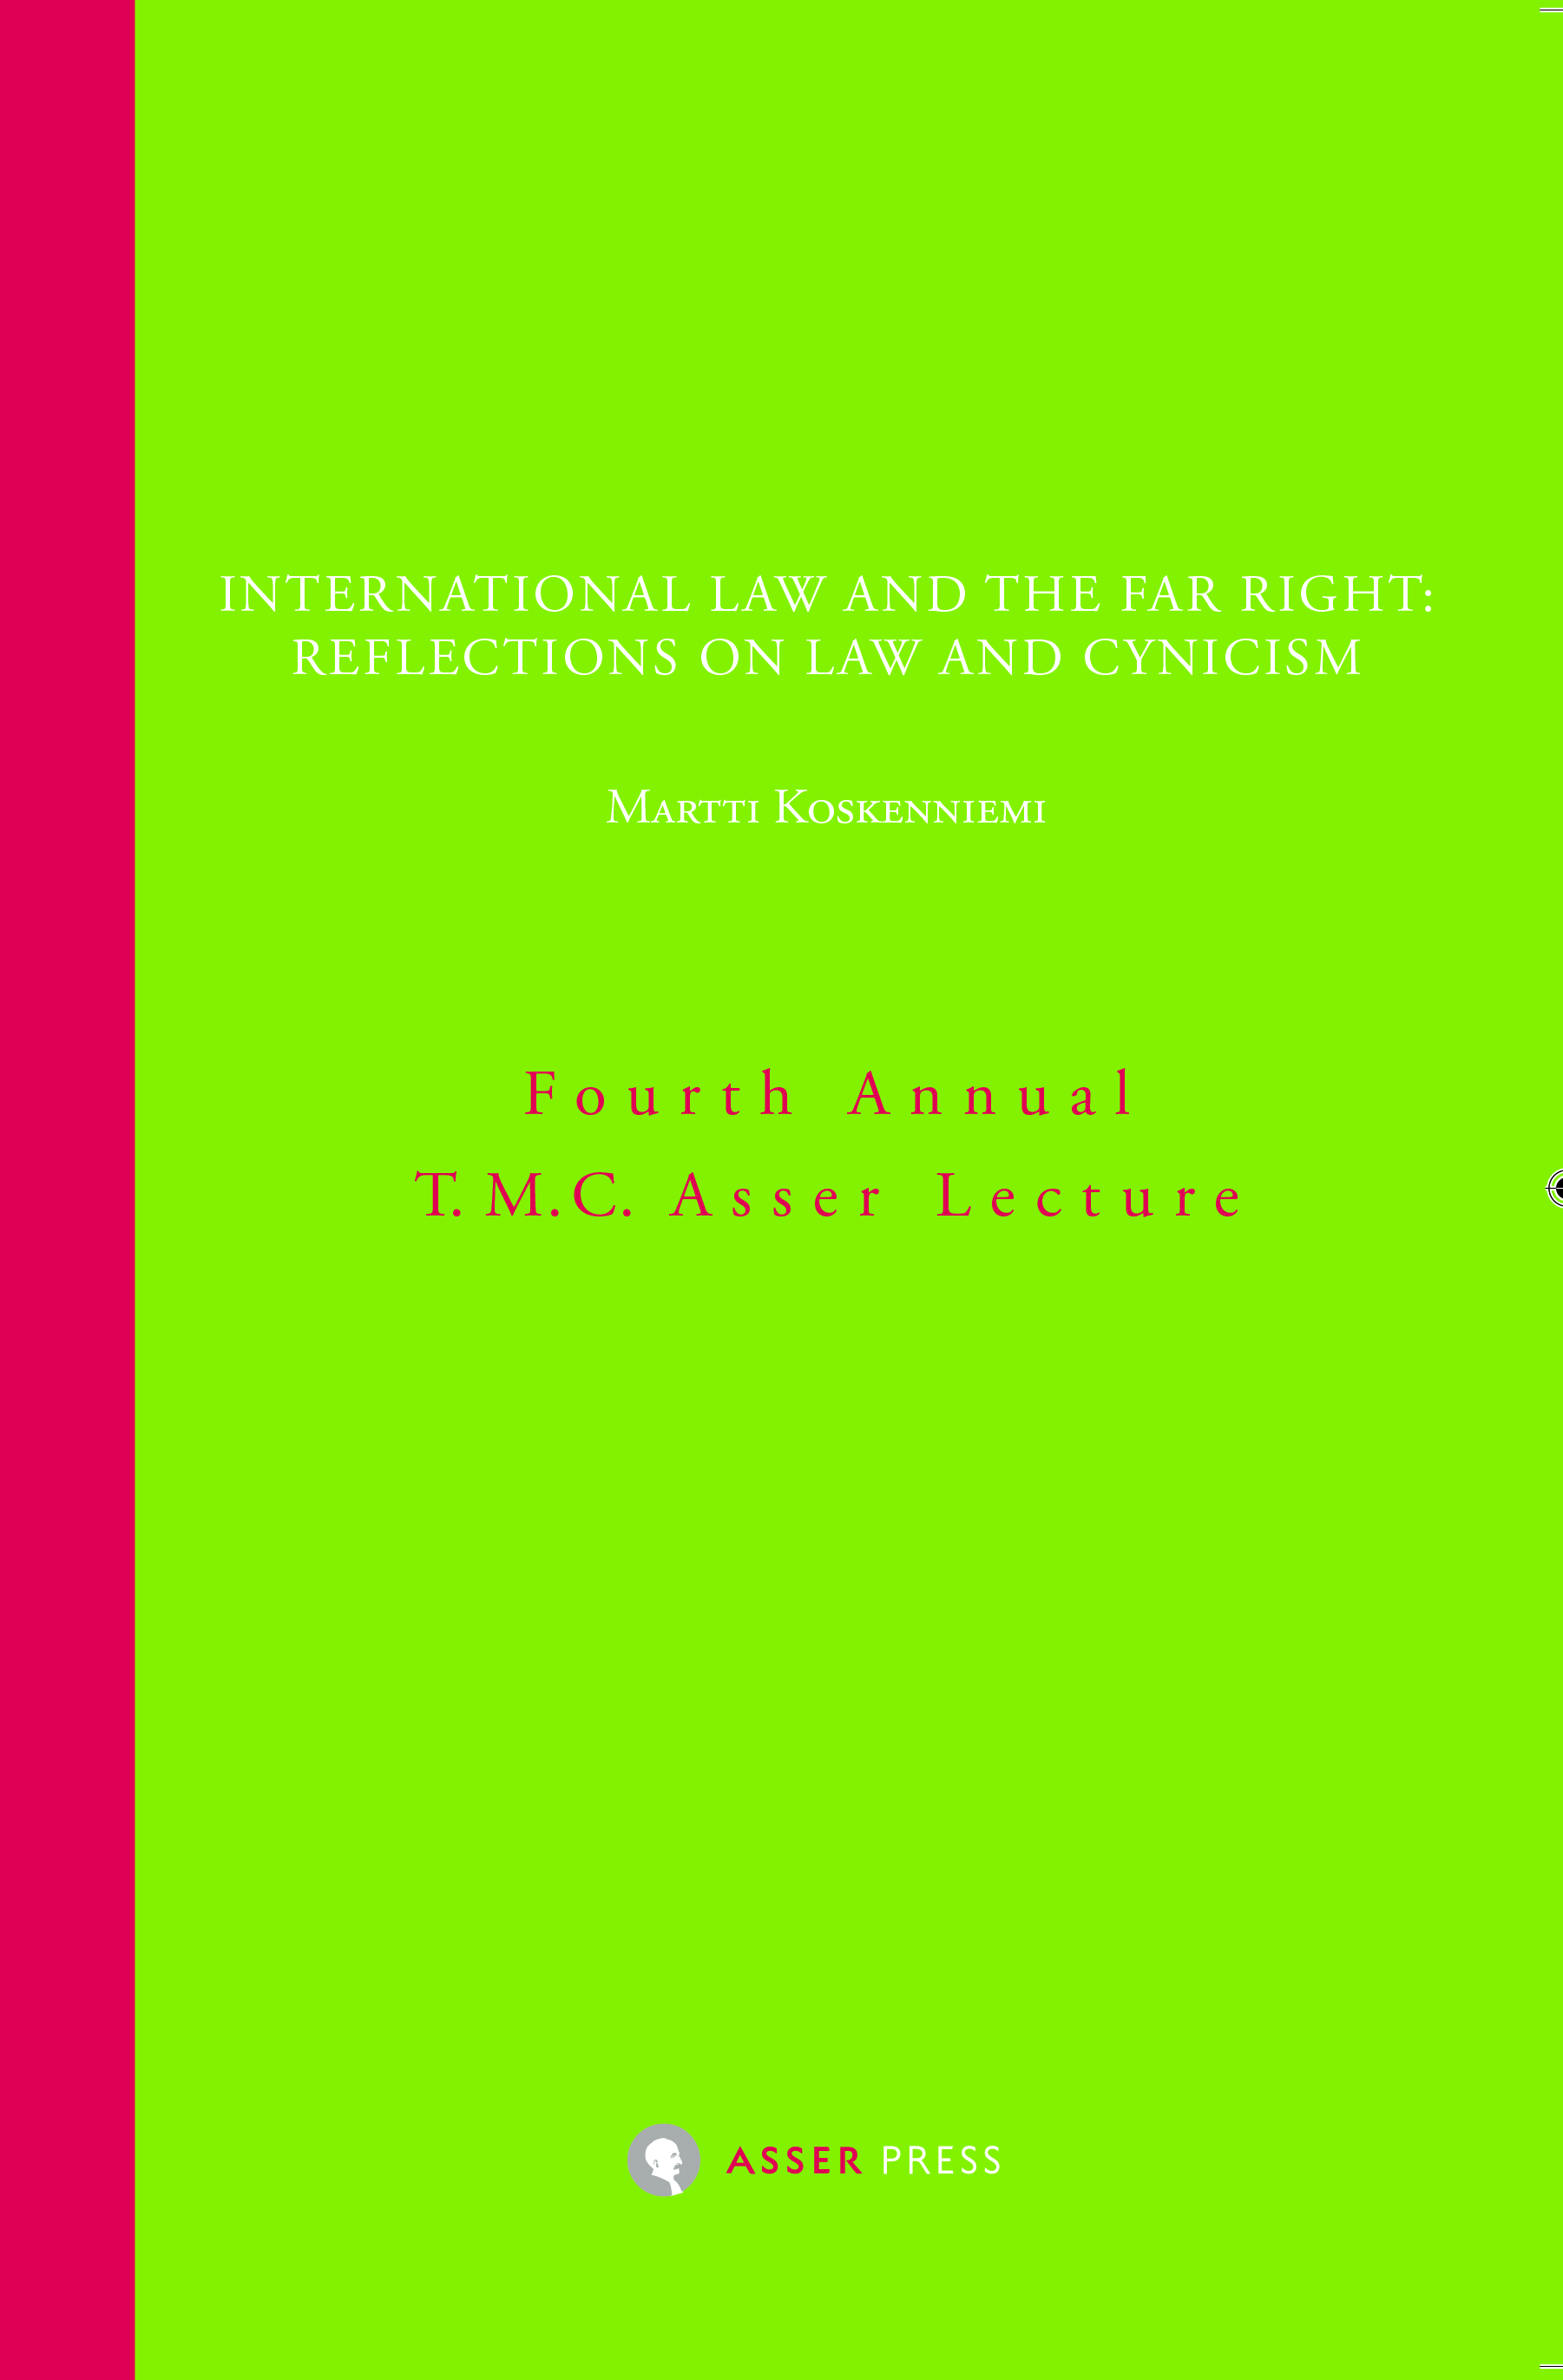 International Law and the Far Right: Reflections on Law and Cynicism - Fourth Annual T.M.C. Asser Lecture